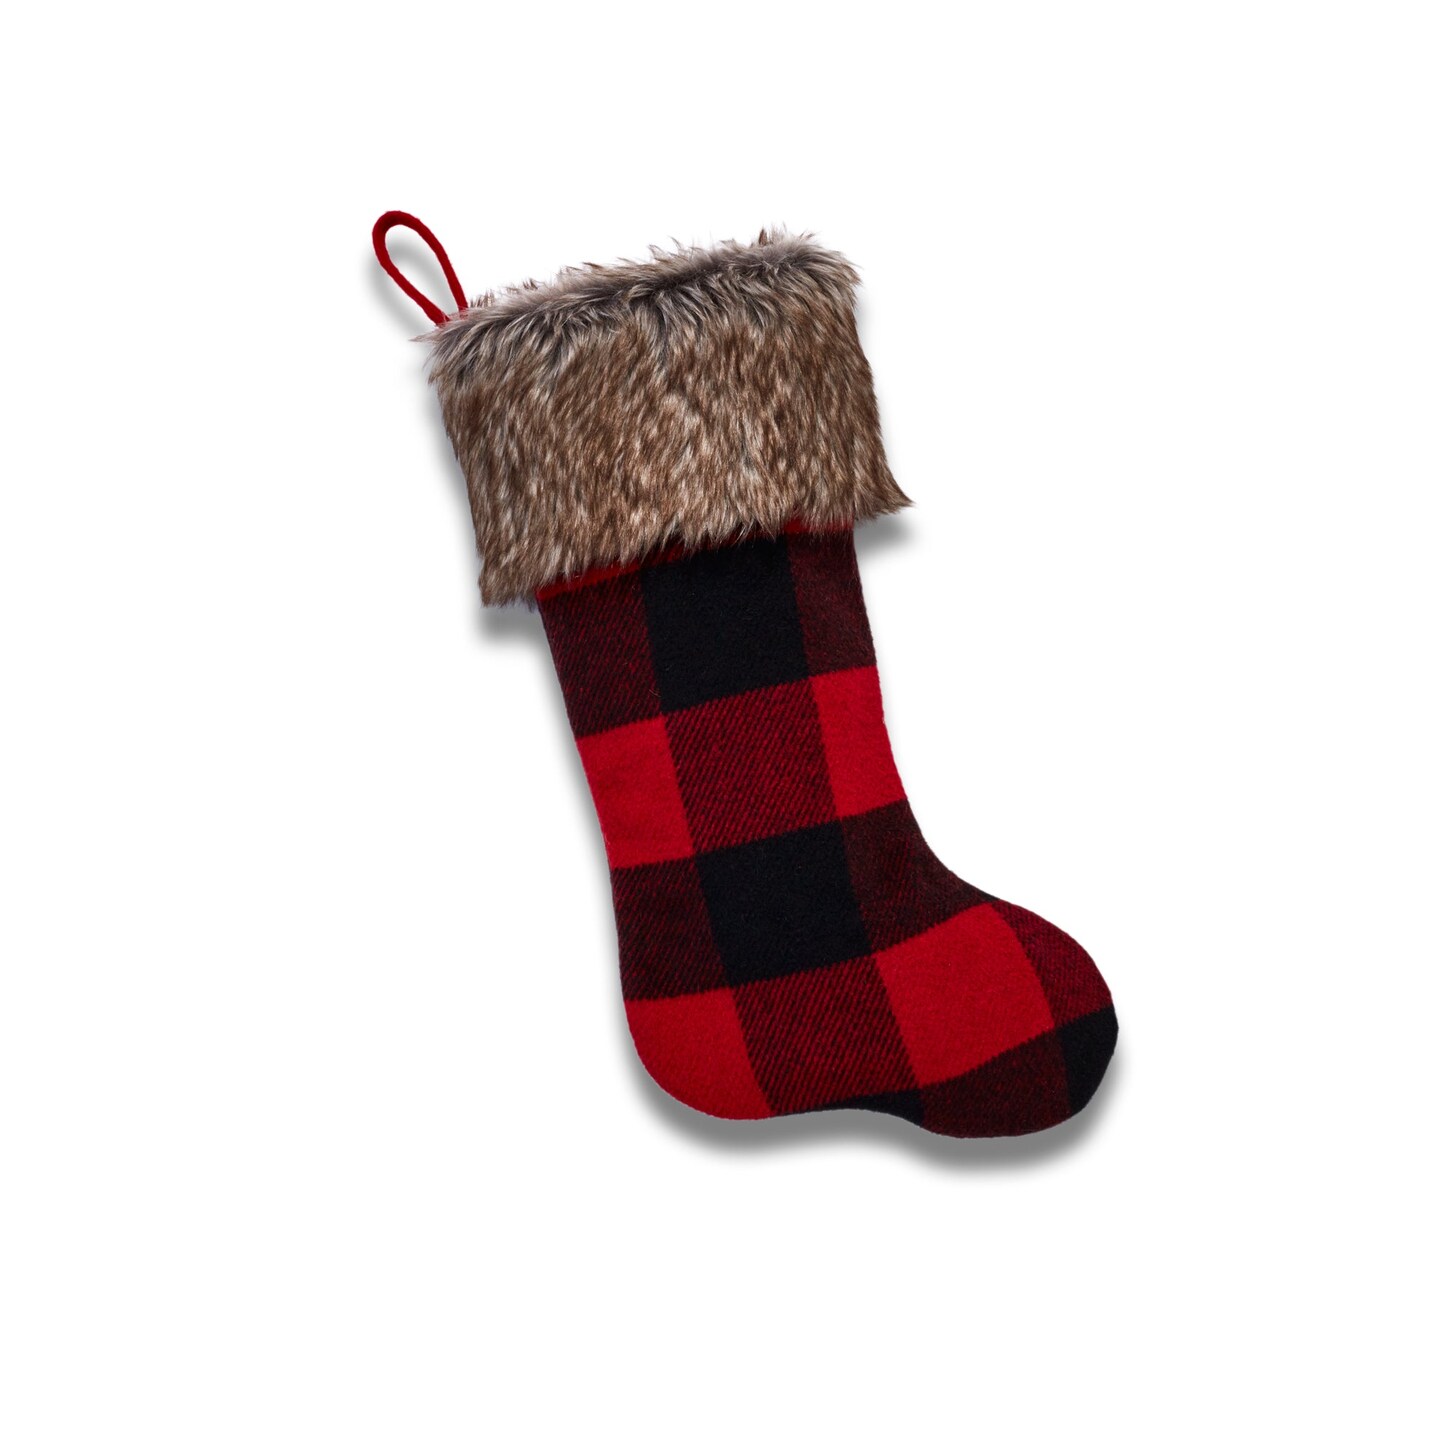 Cabin Blanket Stocking in Red and Black